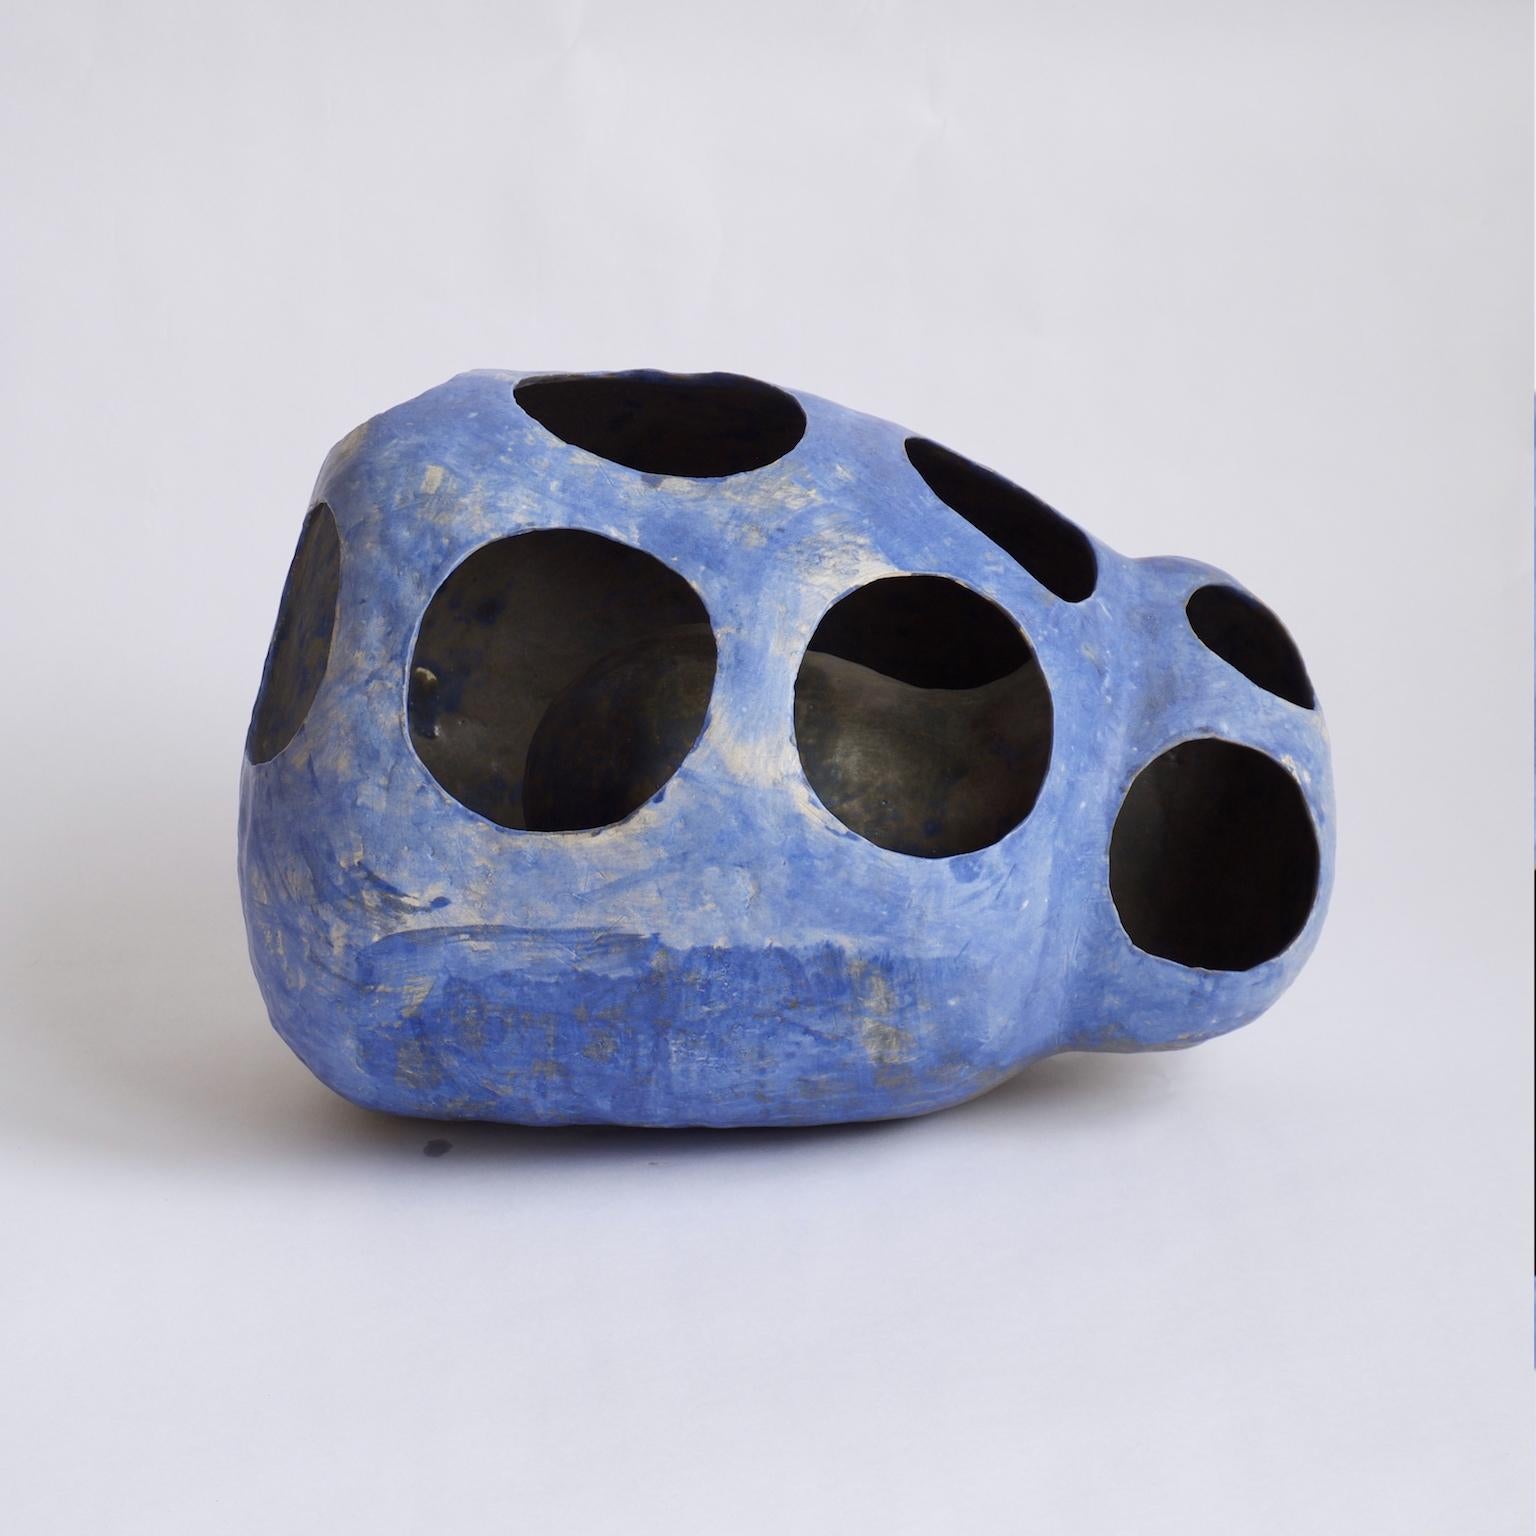 Blue Sheep is a contemporary hand-built stoneware ceramic sculpture with cutouts revealing the double-layered internal structure. This piece is finished in a cobalt oxide glaze, creating the characteristic blue and purple hues. It is entirely